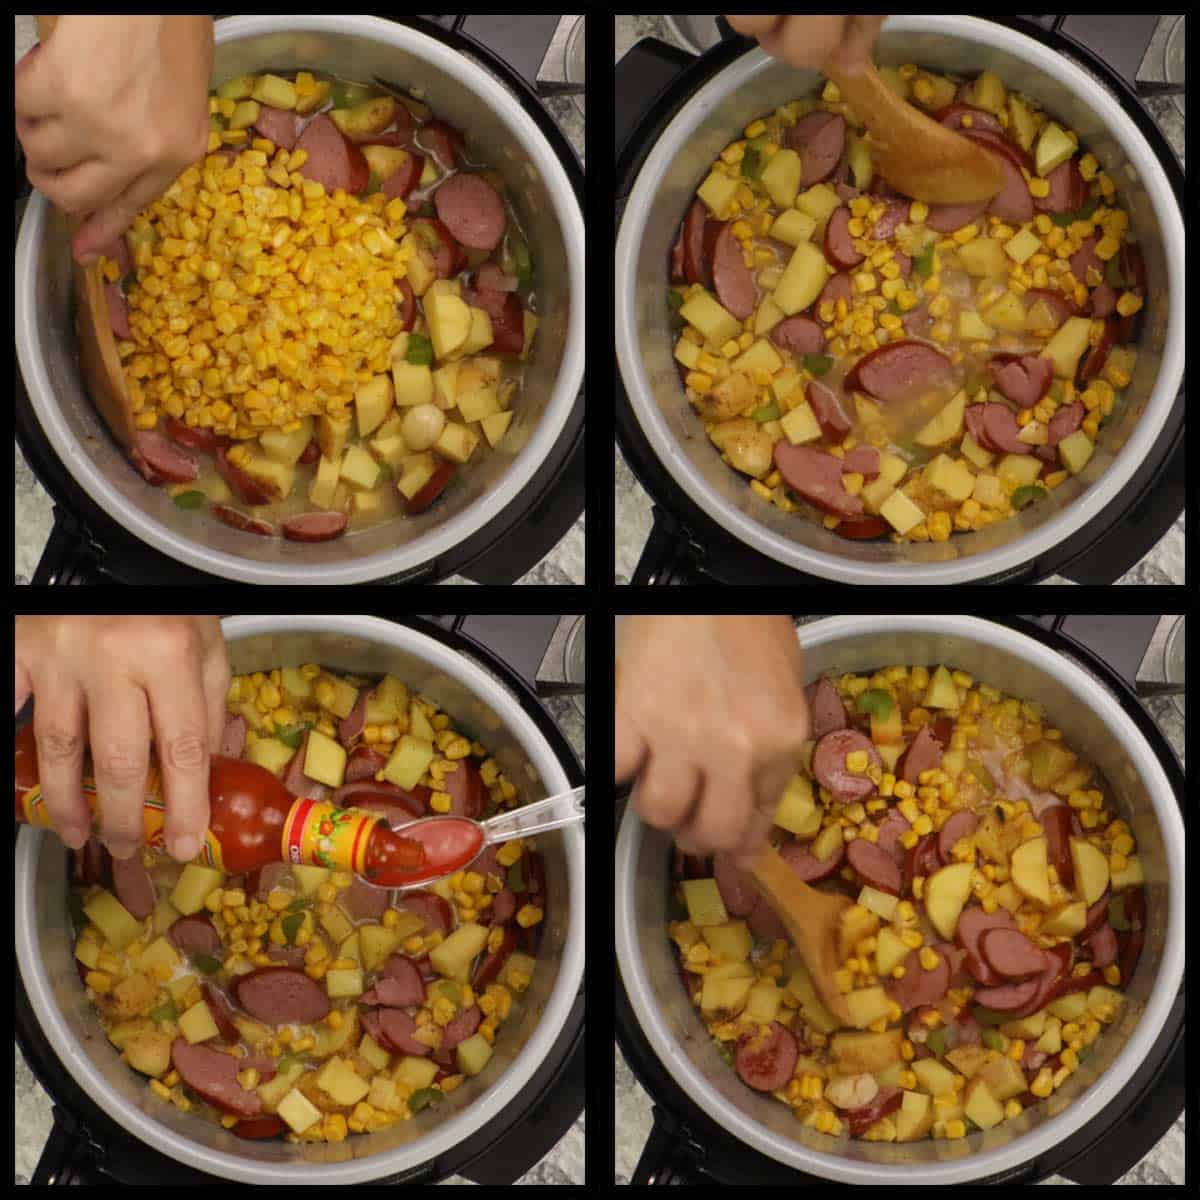 adding the corn and hot sauce before pressure cooking.